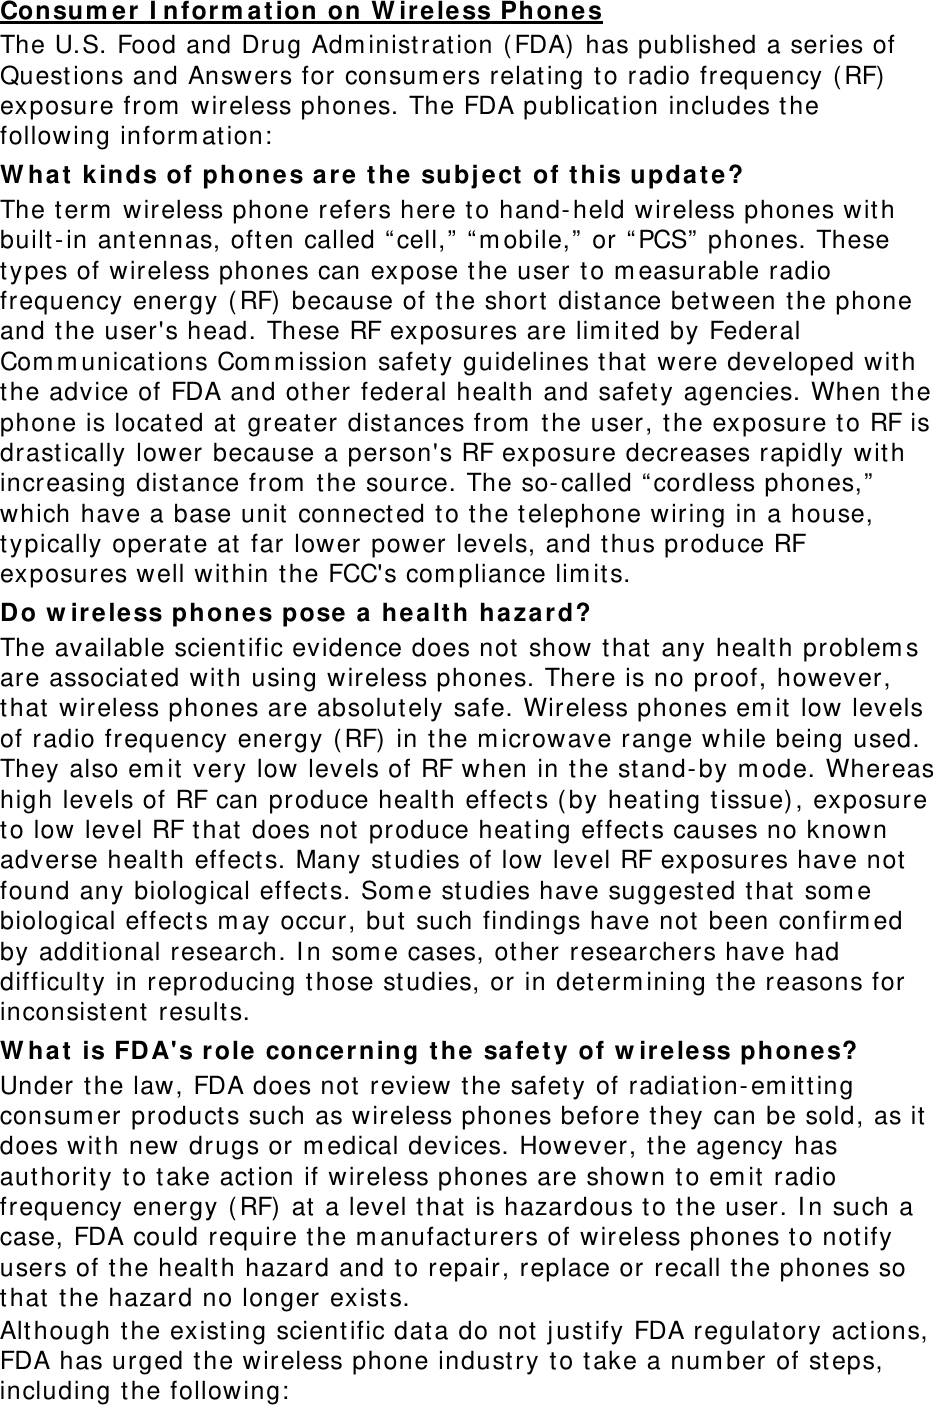 Consum er  I nfor m at ion on W ir ele ss Phon es The U.S. Food and Drug Adm inist ration (FDA) has published a series of Questions and Answers for consum ers relating to radio frequency ( RF)  exposure from  wireless phones. The FDA publication includes t he following inform at ion:  W ha t kinds of phone s are  the subj ect of t his upda t e? The t erm  wireless phone refers here to hand- held wireless phones with built-in antennas, often called “ cell,”  “ m obile,”  or “ PCS”  phones. These types of wireless phones can expose t he user t o m easurable radio frequency energy ( RF) because of the short  distance bet ween the phone and the user&apos;s head. These RF exposures are lim ited by Federal Com m unications Com m ission safet y guidelines that  were developed with the advice of FDA and ot her federal healt h and safety agencies. When t he phone is located at great er dist ances from  t he user, t he exposure t o RF is drast ically lower because a person&apos;s RF exposure decreases rapidly with increasing distance from  t he source. The so- called “ cordless phones,”  which have a base unit connect ed to t he t elephone wiring in a house, typically operate at far lower power levels, and t hus produce RF exposures well within t he FCC&apos;s com pliance lim it s. Do w irele ss phone s pose a h ea lt h hazar d? The available scient ific evidence does not  show that any health problem s are associated wit h using wireless phones. There is no proof, however, that wireless phones are absolut ely safe. Wireless phones em it low levels of radio frequency energy ( RF) in t he m icrowave range while being used. They also em it very low levels of RF when in t he stand- by m ode. Whereas high levels of RF can produce health effect s ( by heat ing t issue) , exposure to low level RF that  does not  produce heating effect s causes no known adverse health effect s. Many st udies of low level RF exposures have not  found any biological effect s. Som e studies have suggest ed t hat som e biological effect s m ay occur, but  such findings have not been confirm ed by additional research. I n som e cases, ot her researchers have had difficulty in reproducing t hose studies, or in det erm ining t he reasons for inconsist ent results. W ha t is FD A&apos;s role  concer ning t he  safe t y of w ir ele ss ph ones? Under the law, FDA does not review the safet y of radiat ion- em itt ing consum er product s such as wireless phones before they can be sold, as it  does wit h new drugs or m edical devices. However, t he agency has aut hority to take act ion if wireless phones are shown t o em it radio frequency energy ( RF)  at a level that  is hazardous t o t he user. I n such a case, FDA could require t he m anufact urers of w ireless phones t o not ify users of t he health hazard and t o repair, replace or recall t he phones so that the hazard no longer exist s. Alt hough t he existing scient ific dat a do not j ust ify FDA regulat ory actions, FDA has urged the wireless phone industry to t ake a num ber of st eps, including t he following:  